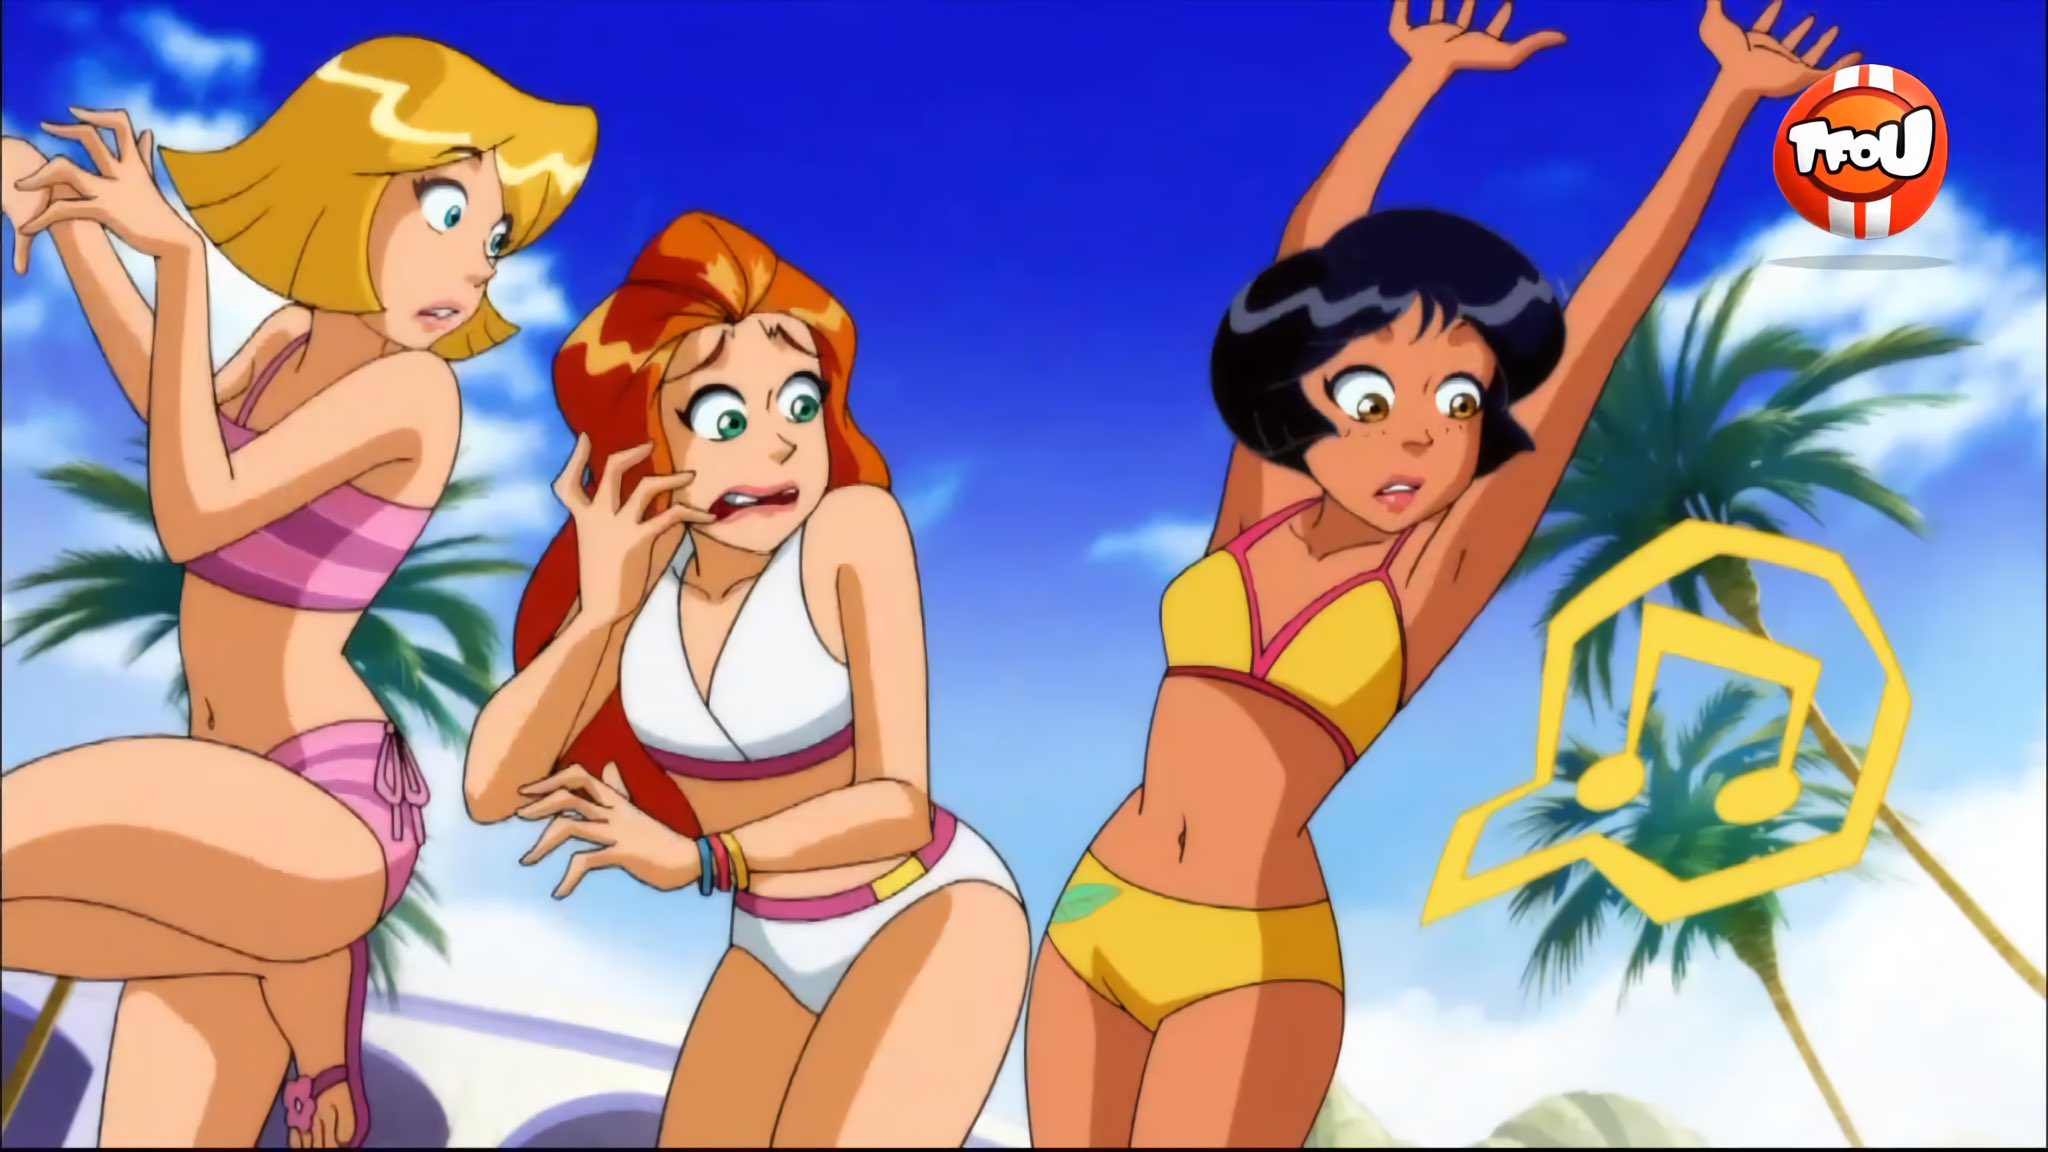 “A Totally Totally Spies edit featuring Sam, Alex and Clover. #edit” .